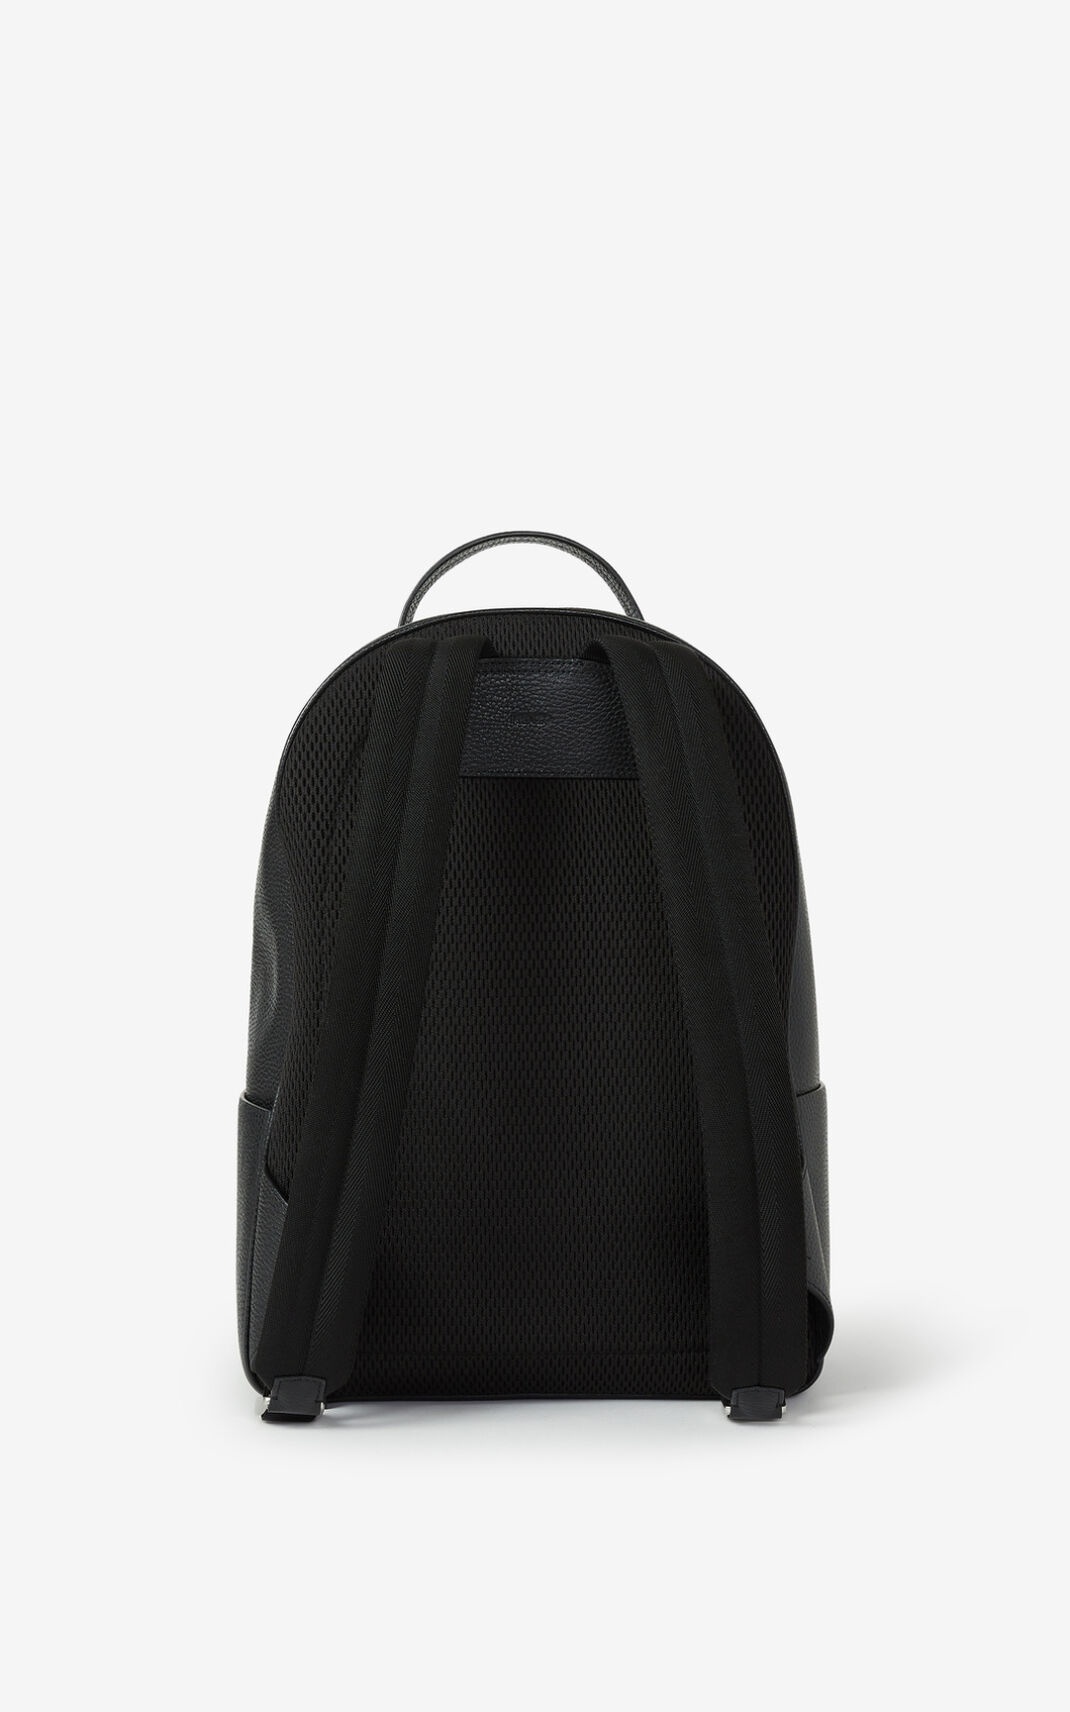 Grained leather backpack - 3